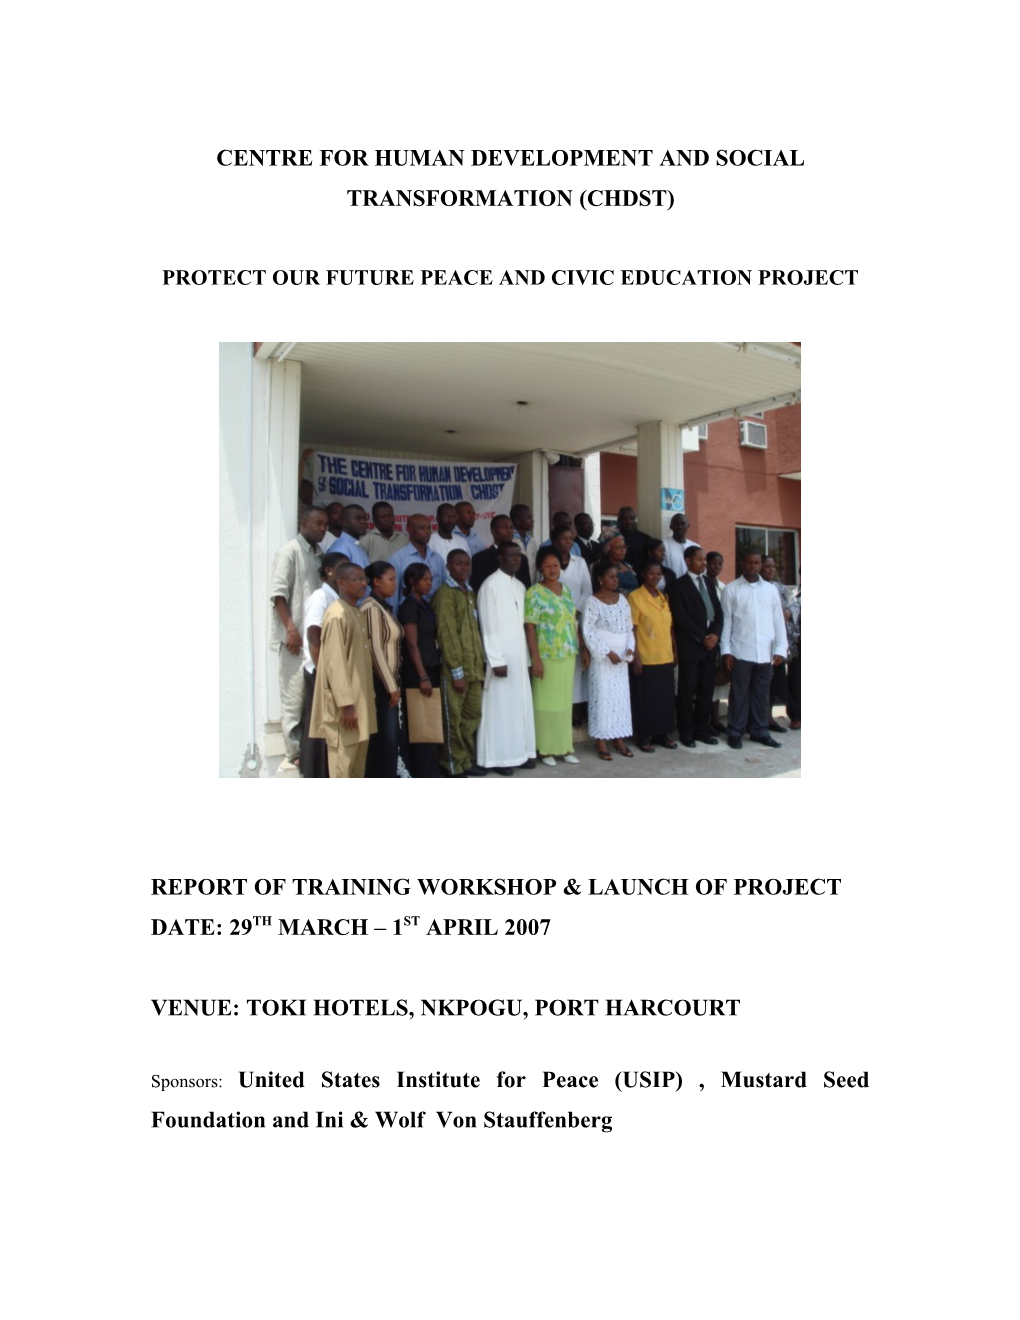 Centre for Human Development and Social Transformation (Chdst)